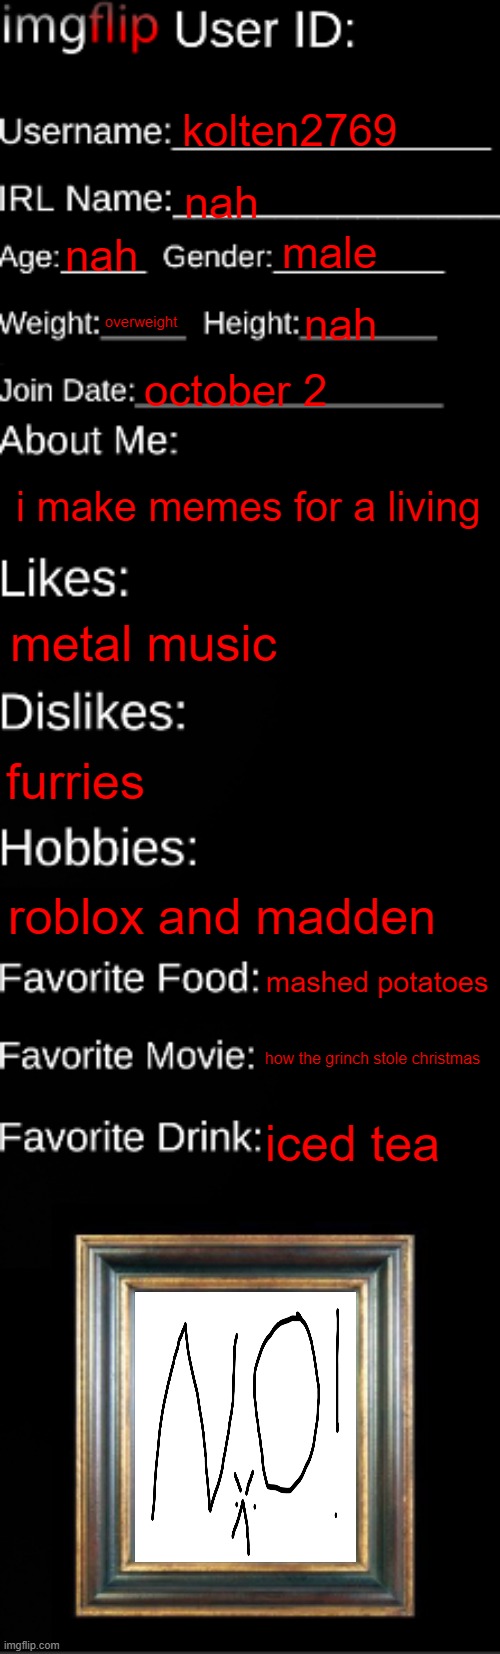 e |  kolten2769; nah; male; nah; overweight; nah; october 2; i make memes for a living; metal music; furries; roblox and madden; mashed potatoes; how the grinch stole christmas; iced tea | image tagged in imgflip id card | made w/ Imgflip meme maker